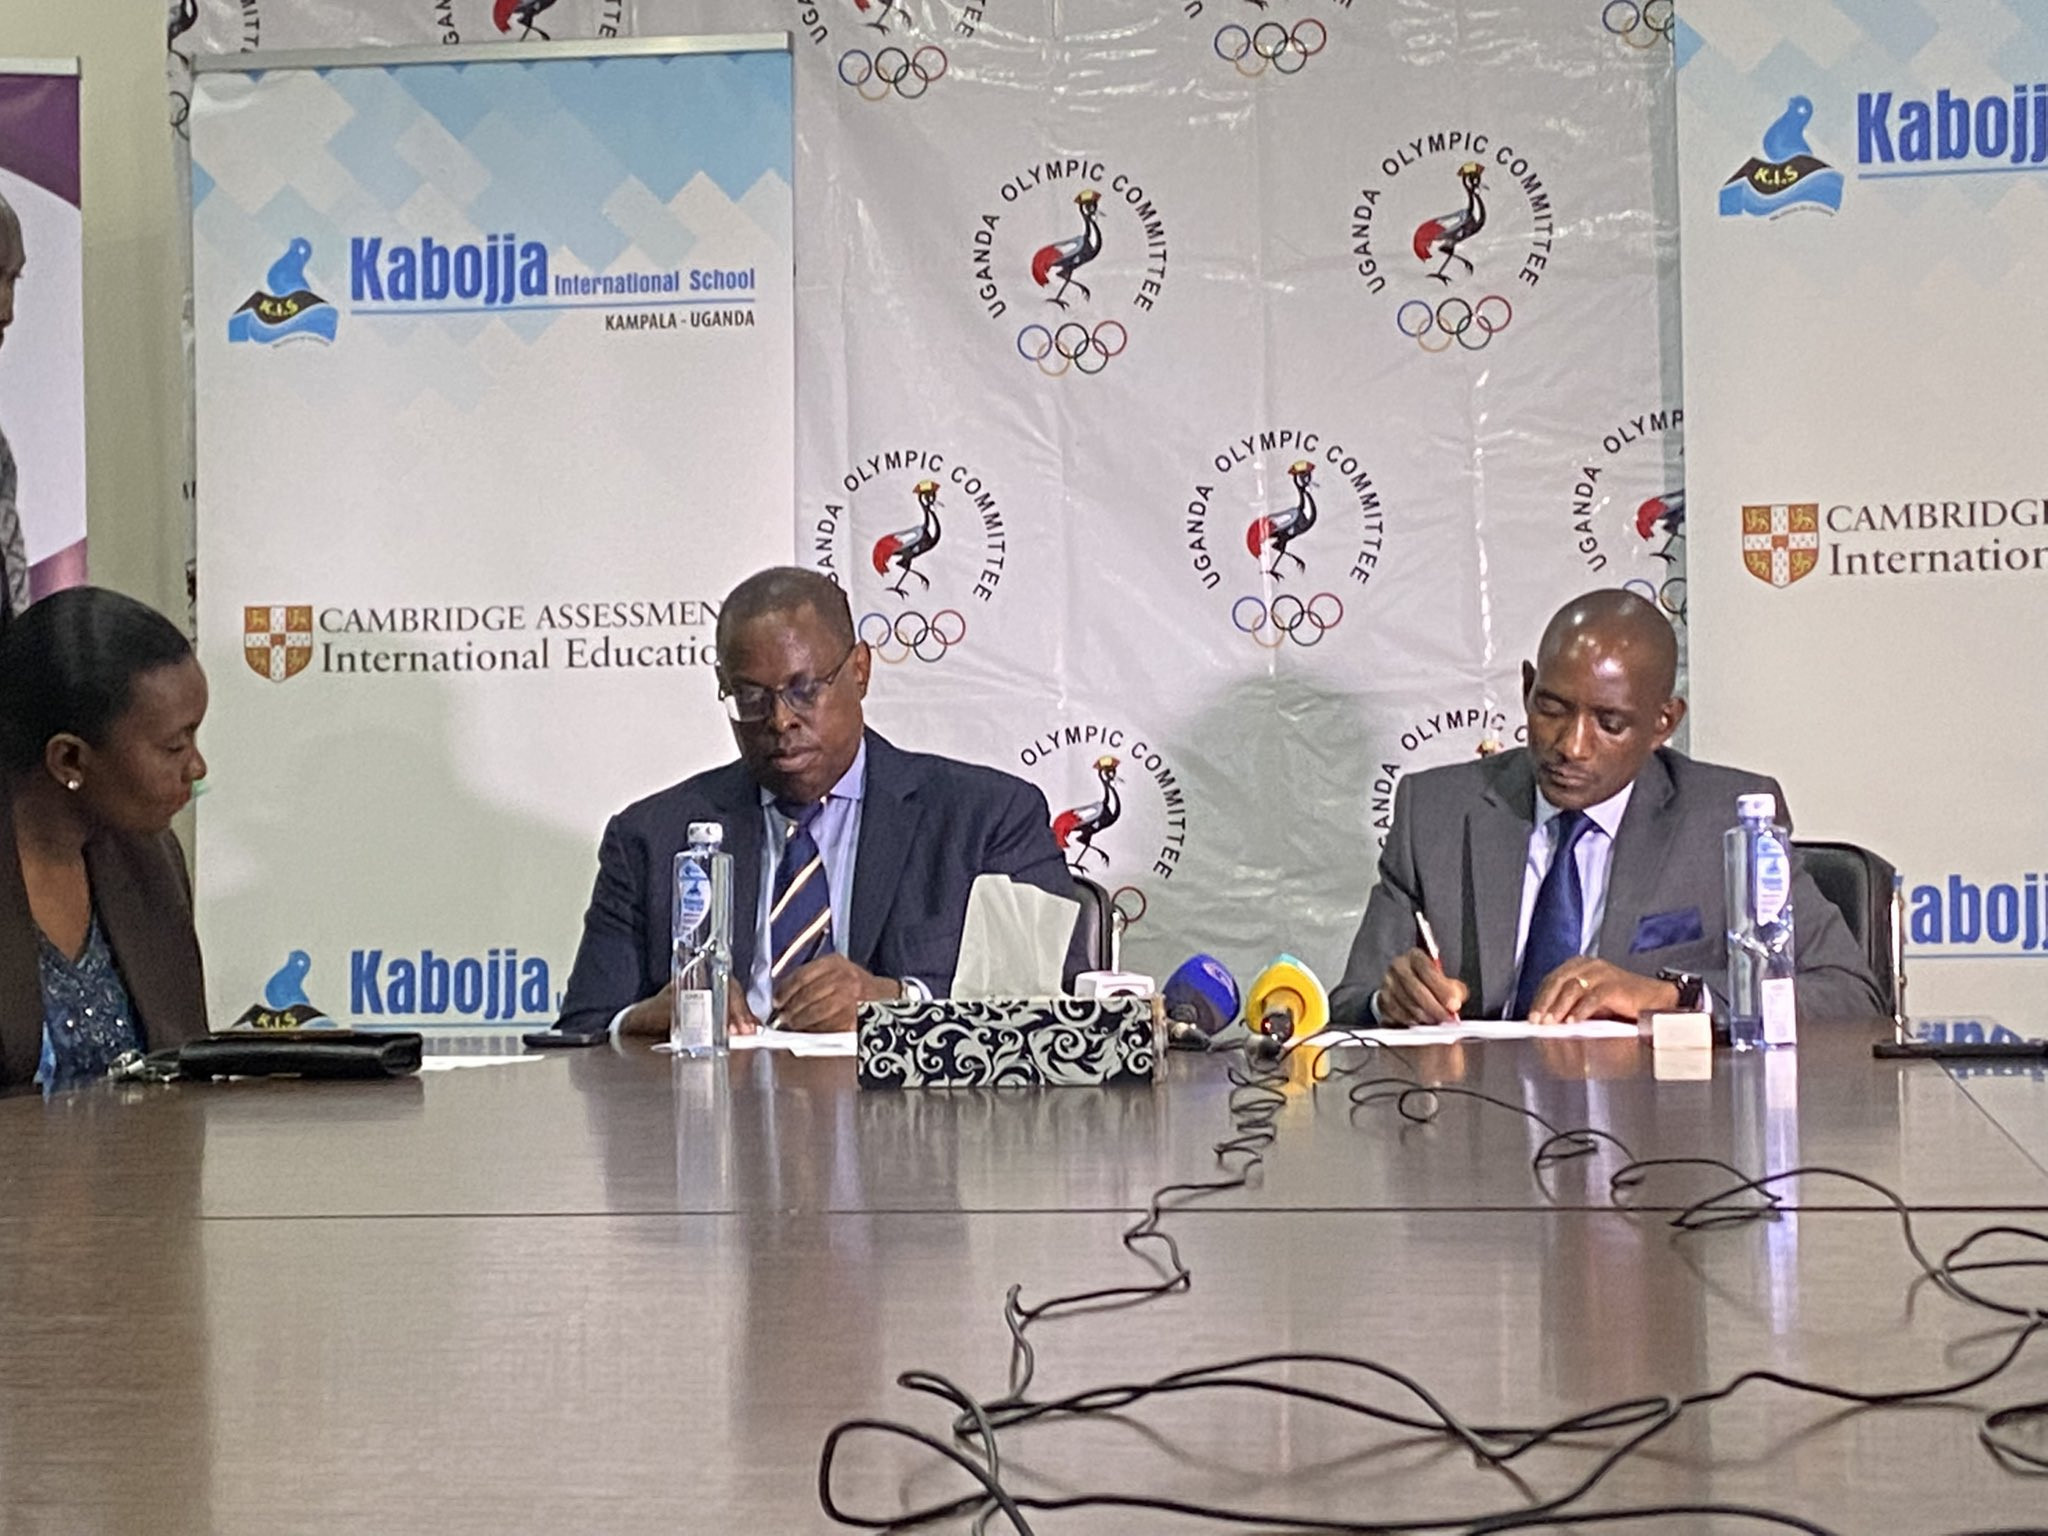 Uganda Olympic Committee signs MoU with Kabojja International School to promote Olympic values